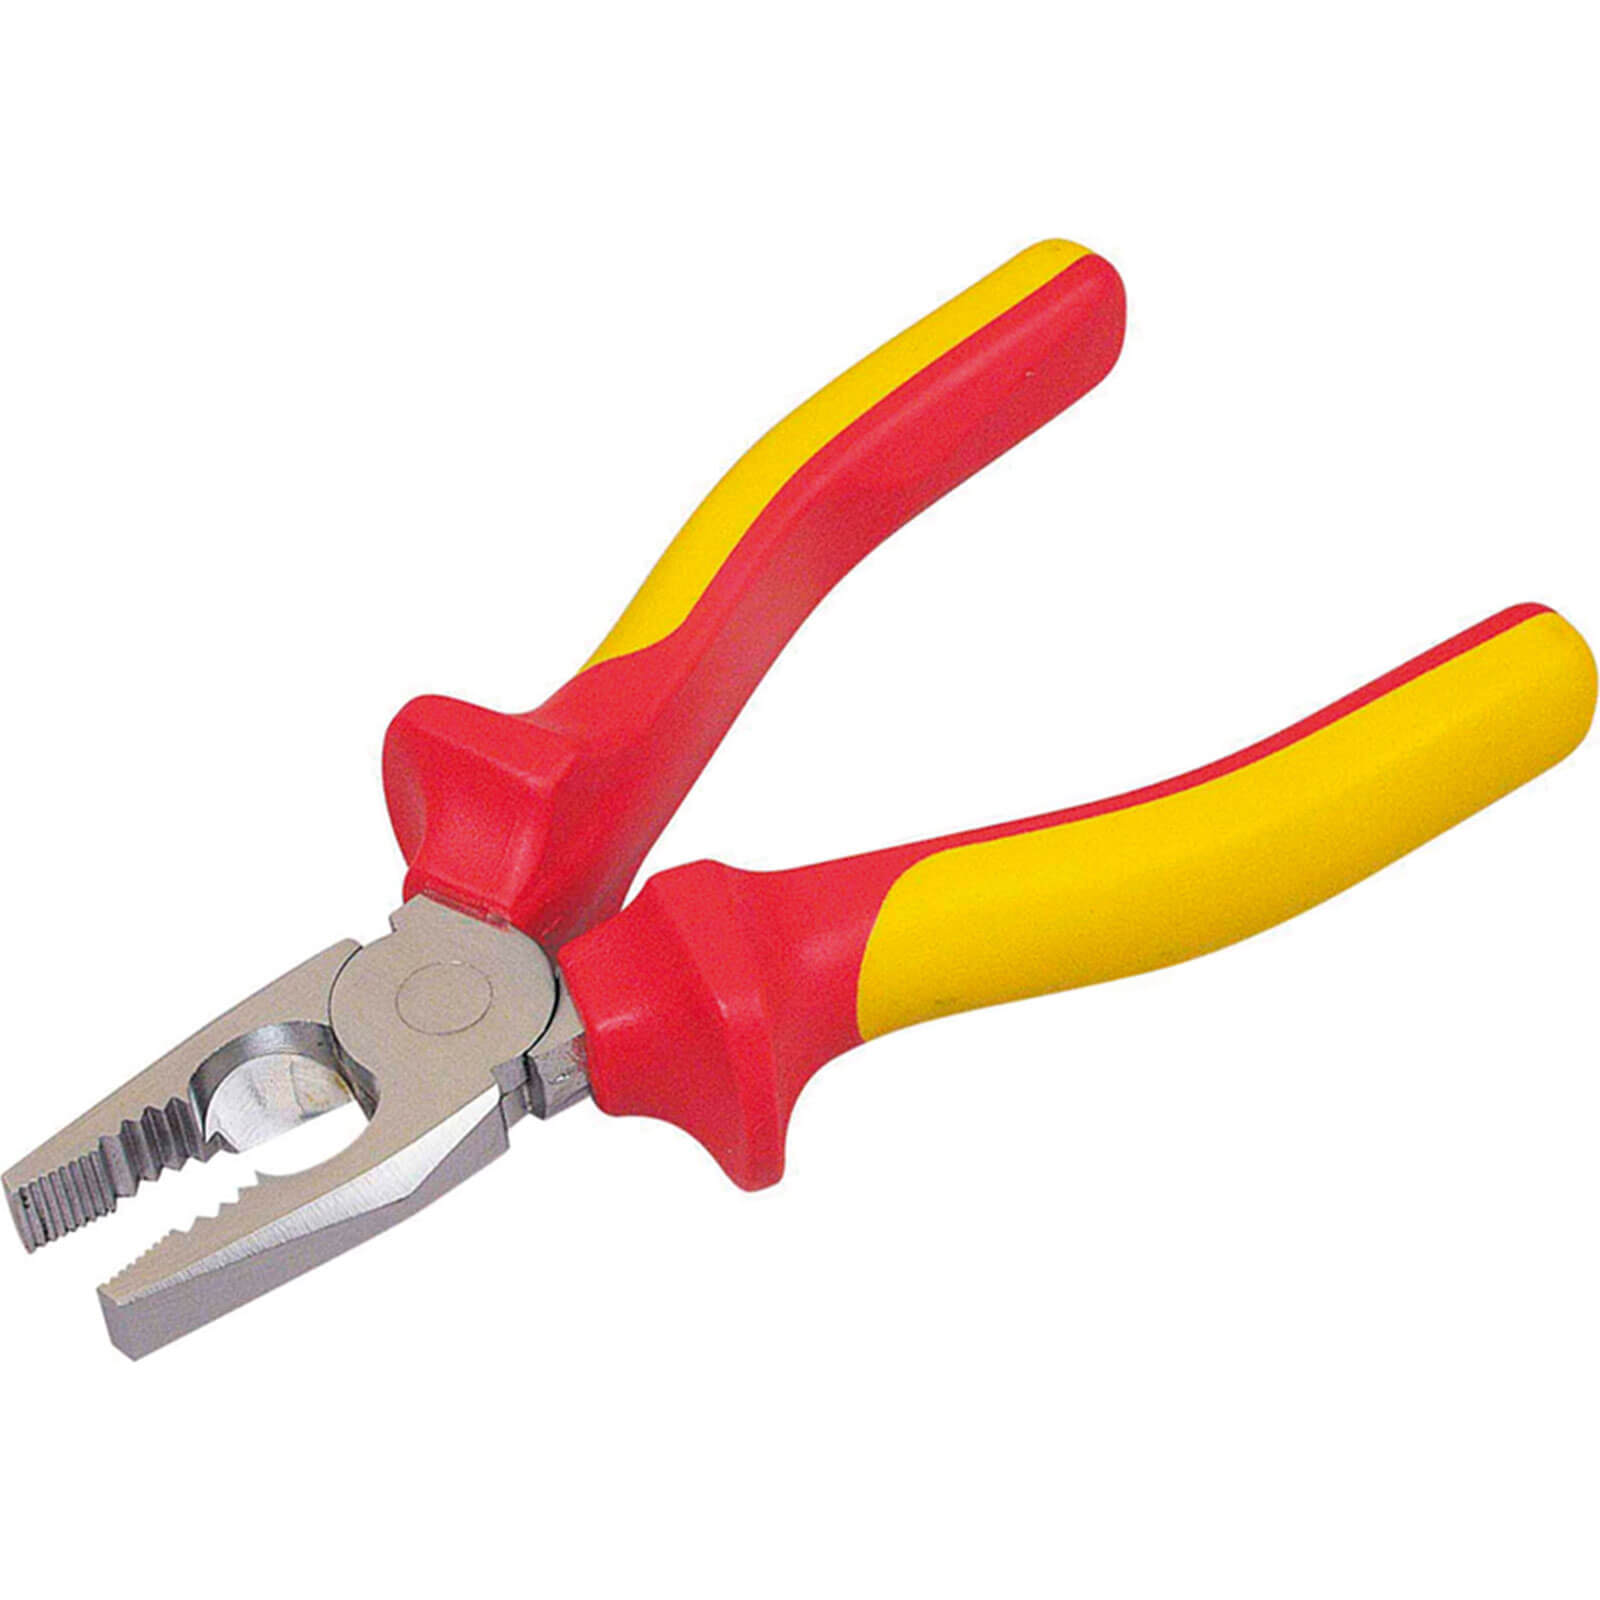 Photo of Stanley Insulated Vde Combination Pliers 160mm